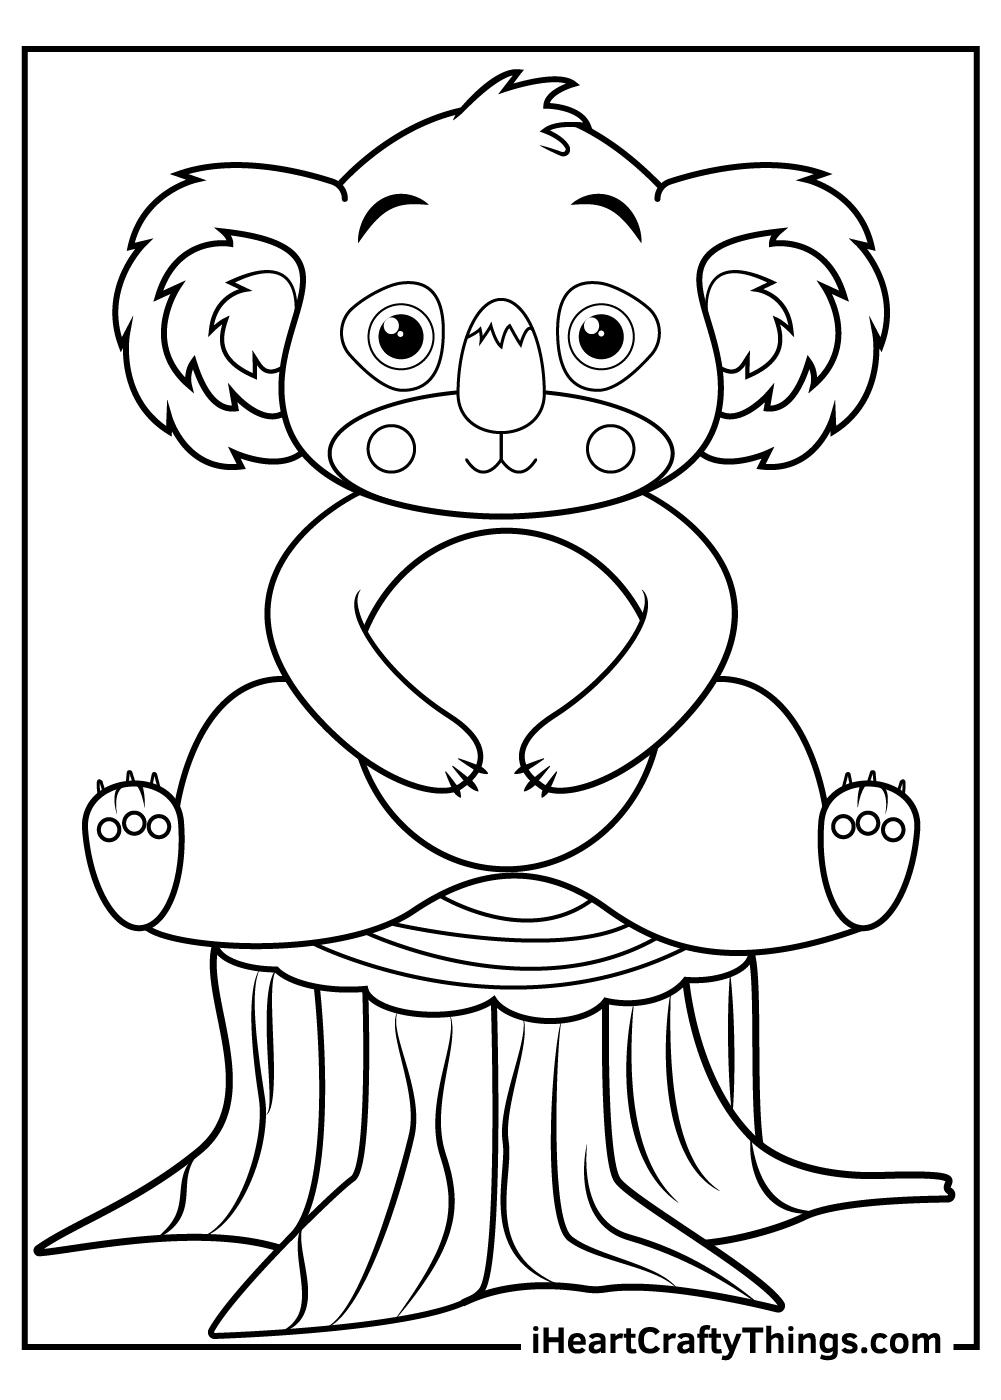 Koalas Coloring Pages Updated 20